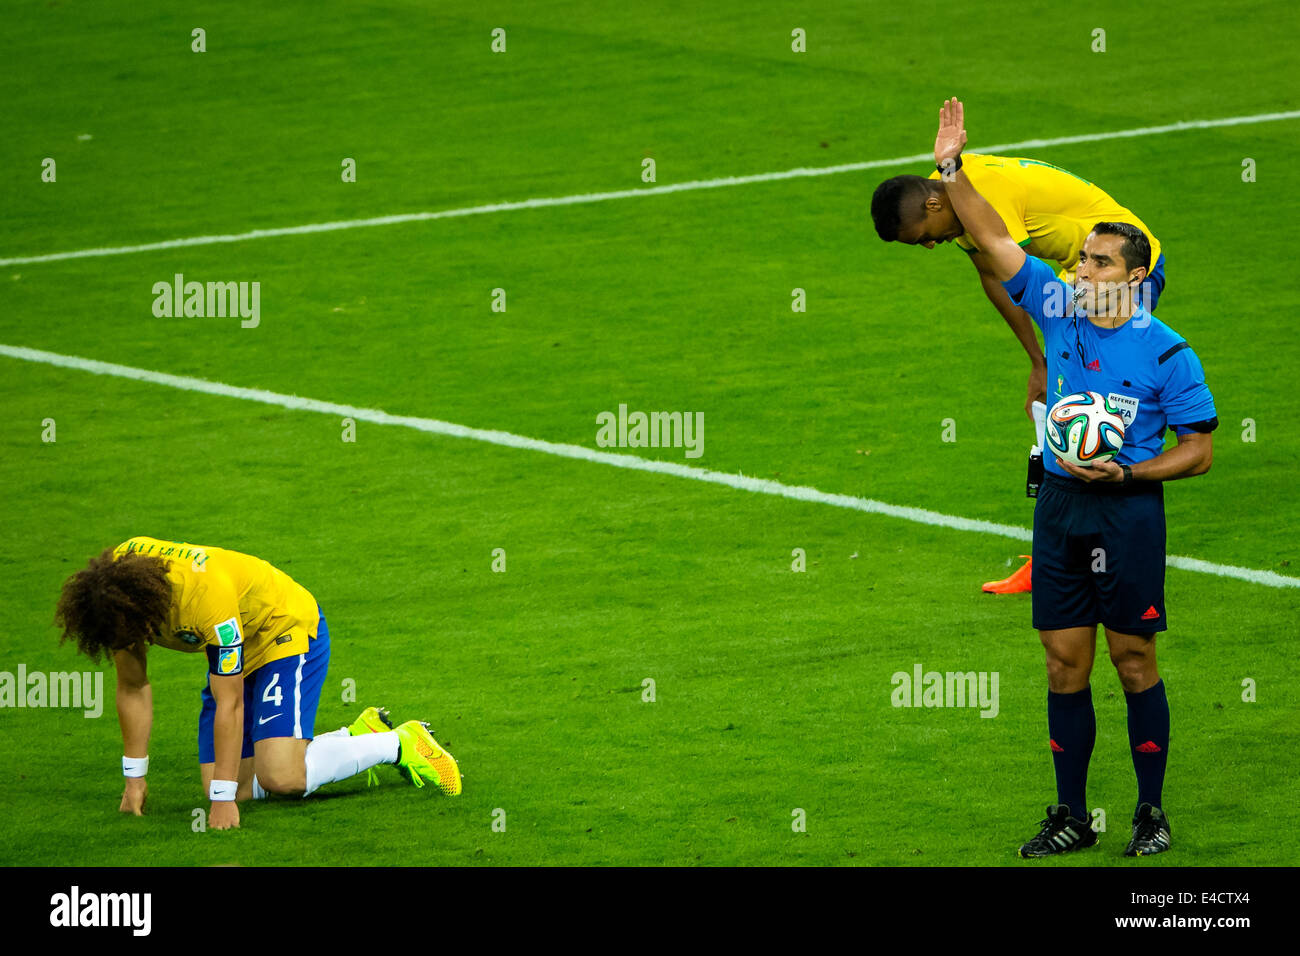 Belo Horizonte, Brazil. 8th July, 2014. Mexico's referee Marco Rodriguez (R) blows the final whistle at the end of a semifinal match between Brazil and Germany of 2014 FIFA World Cup at the Estadio Mineirao Stadium in Belo Horizonte, Brazil, on July 8, 2014. Germany won 7-1 over Brazil and qualified for the final on Tuesday. Credit:  Li Bin/Xinhua/Alamy Live News Stock Photo